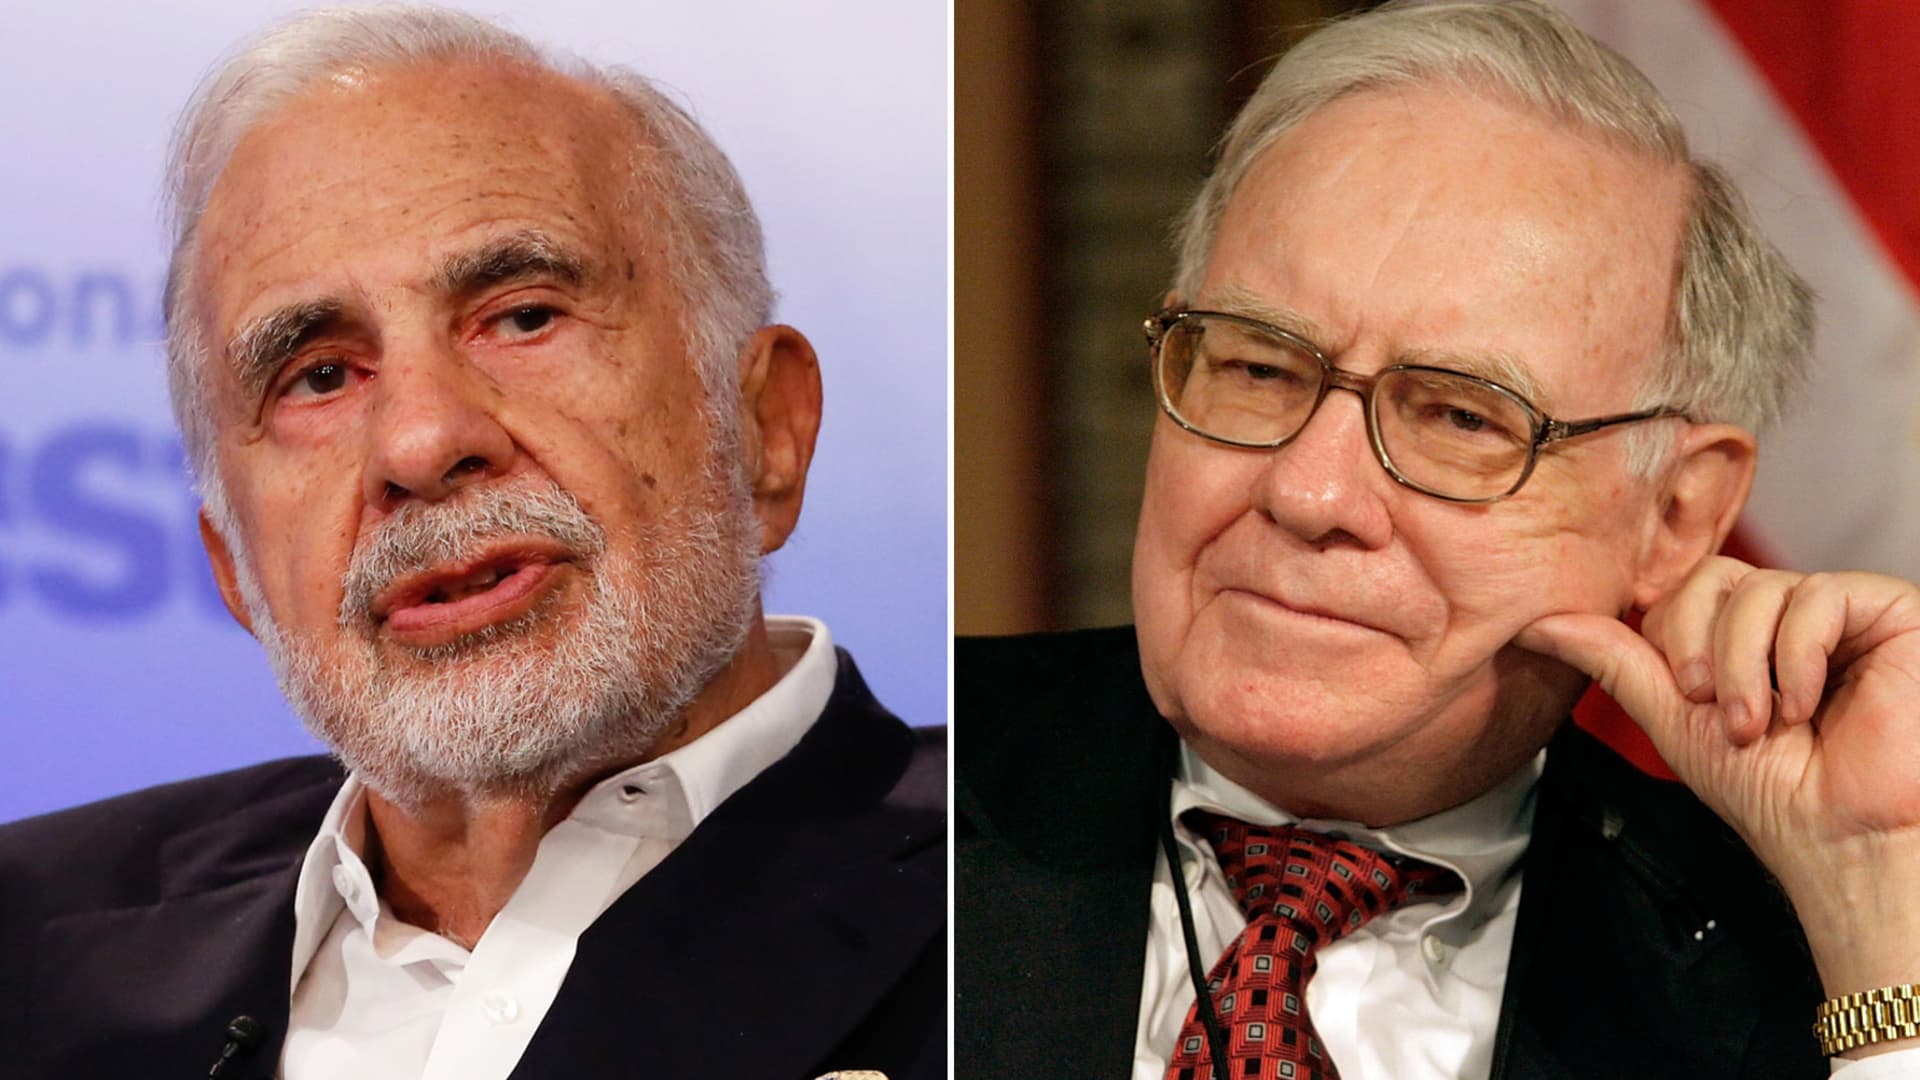 Carl Icahn describes how his style is different from that of fellow investing icon Warren Buffett